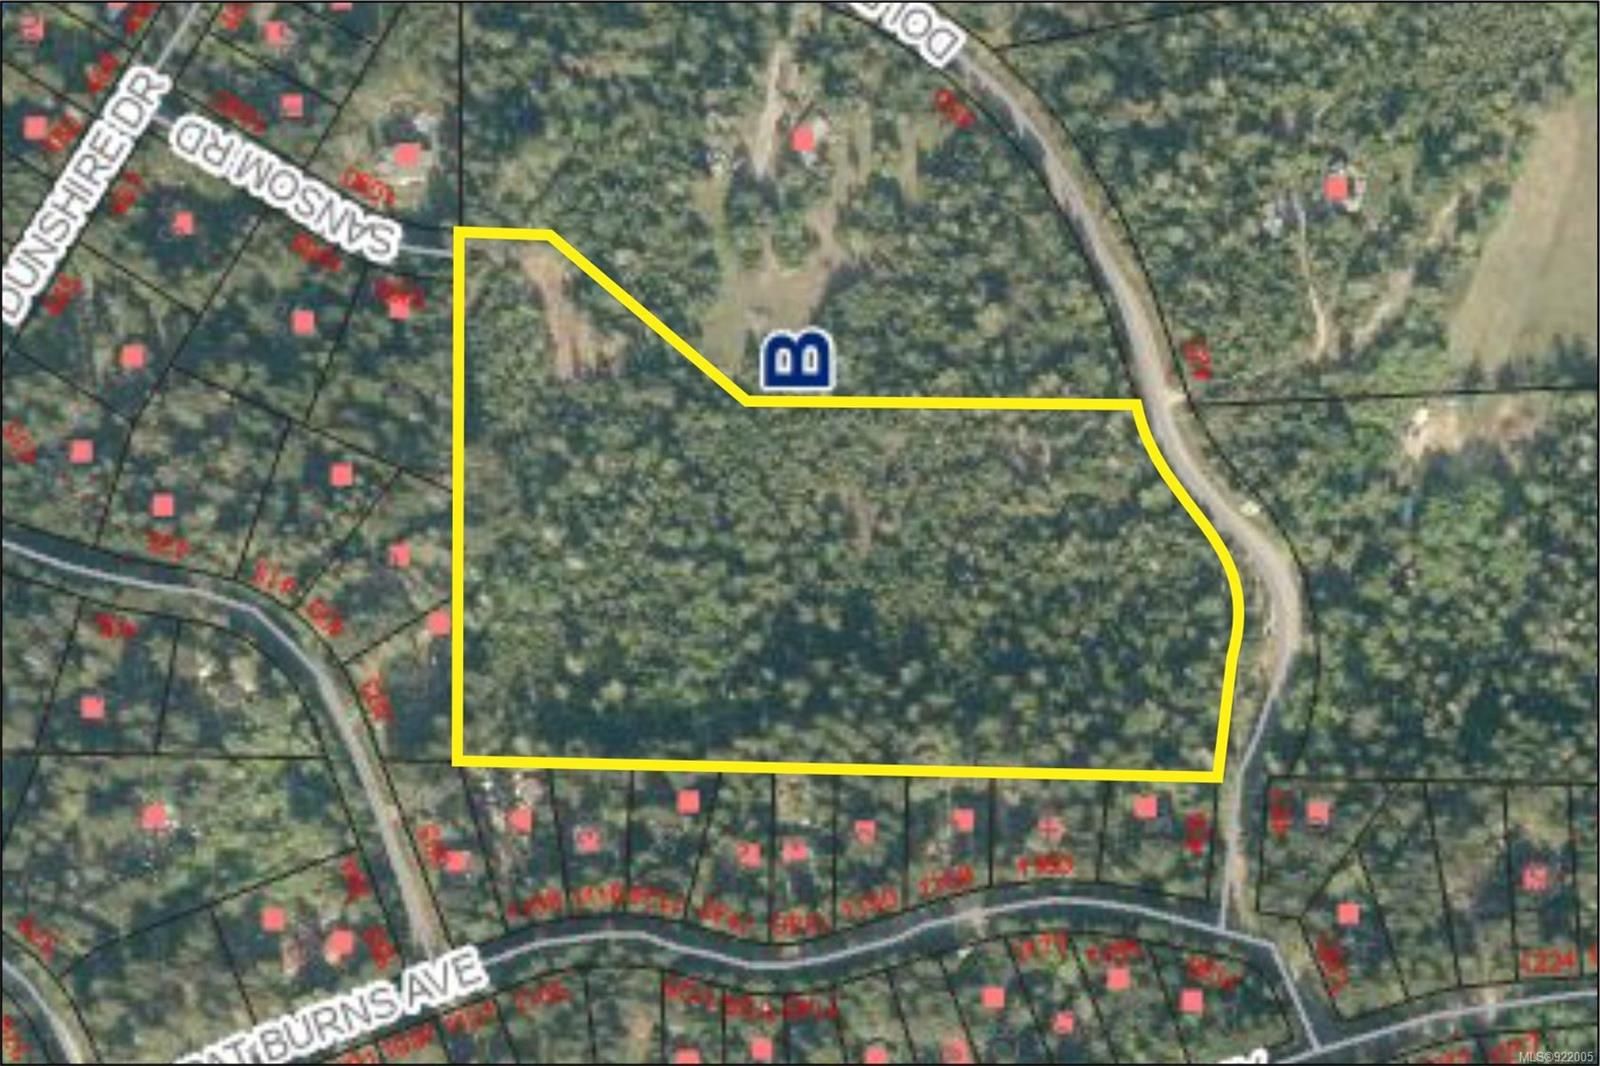 12 Acres - Two access roads